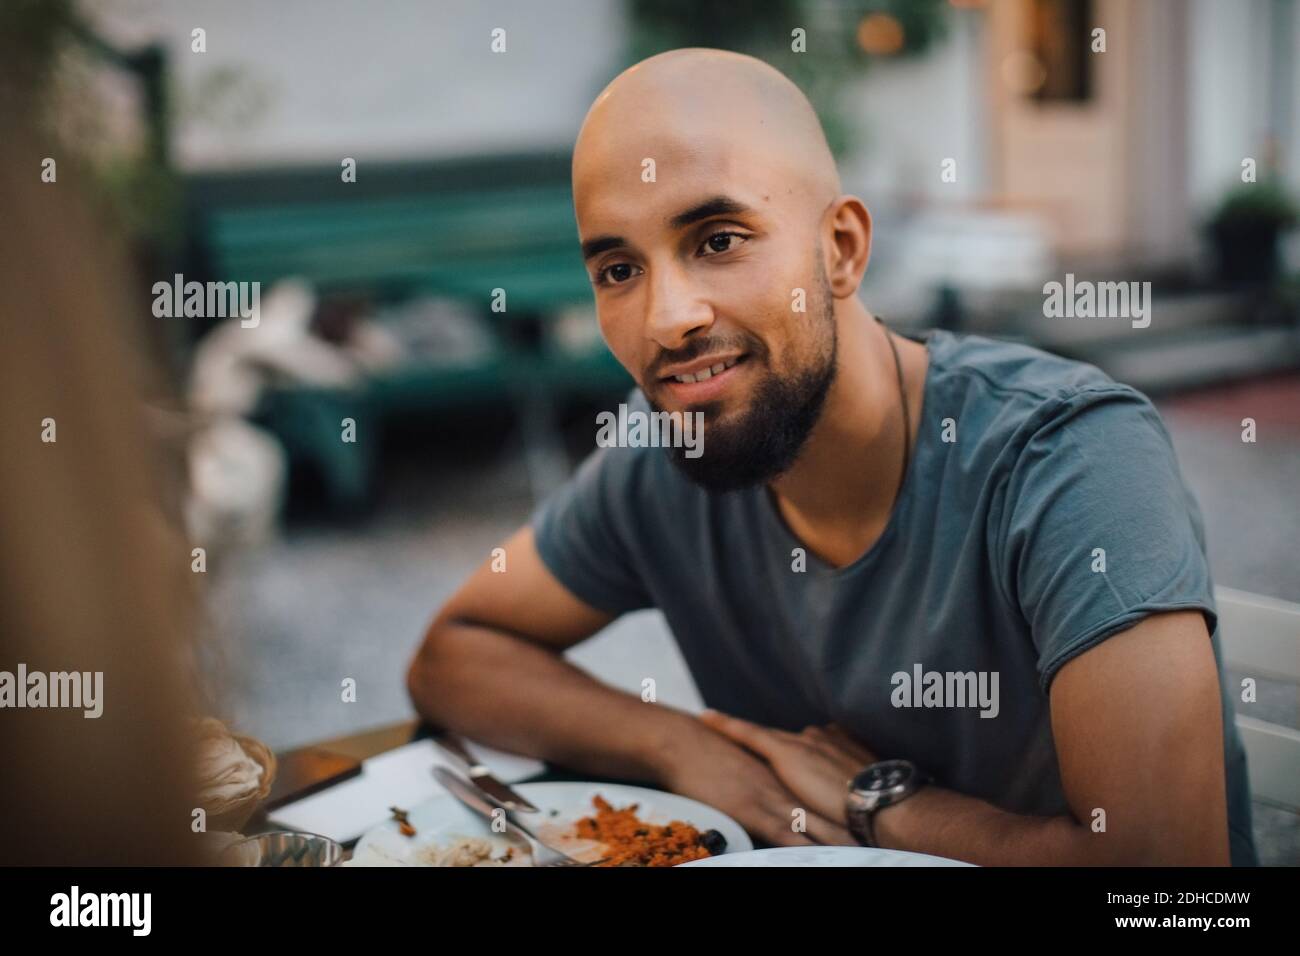 Smiling young man with shaved head looking at female friend during dinner party in backyard Stock Photo